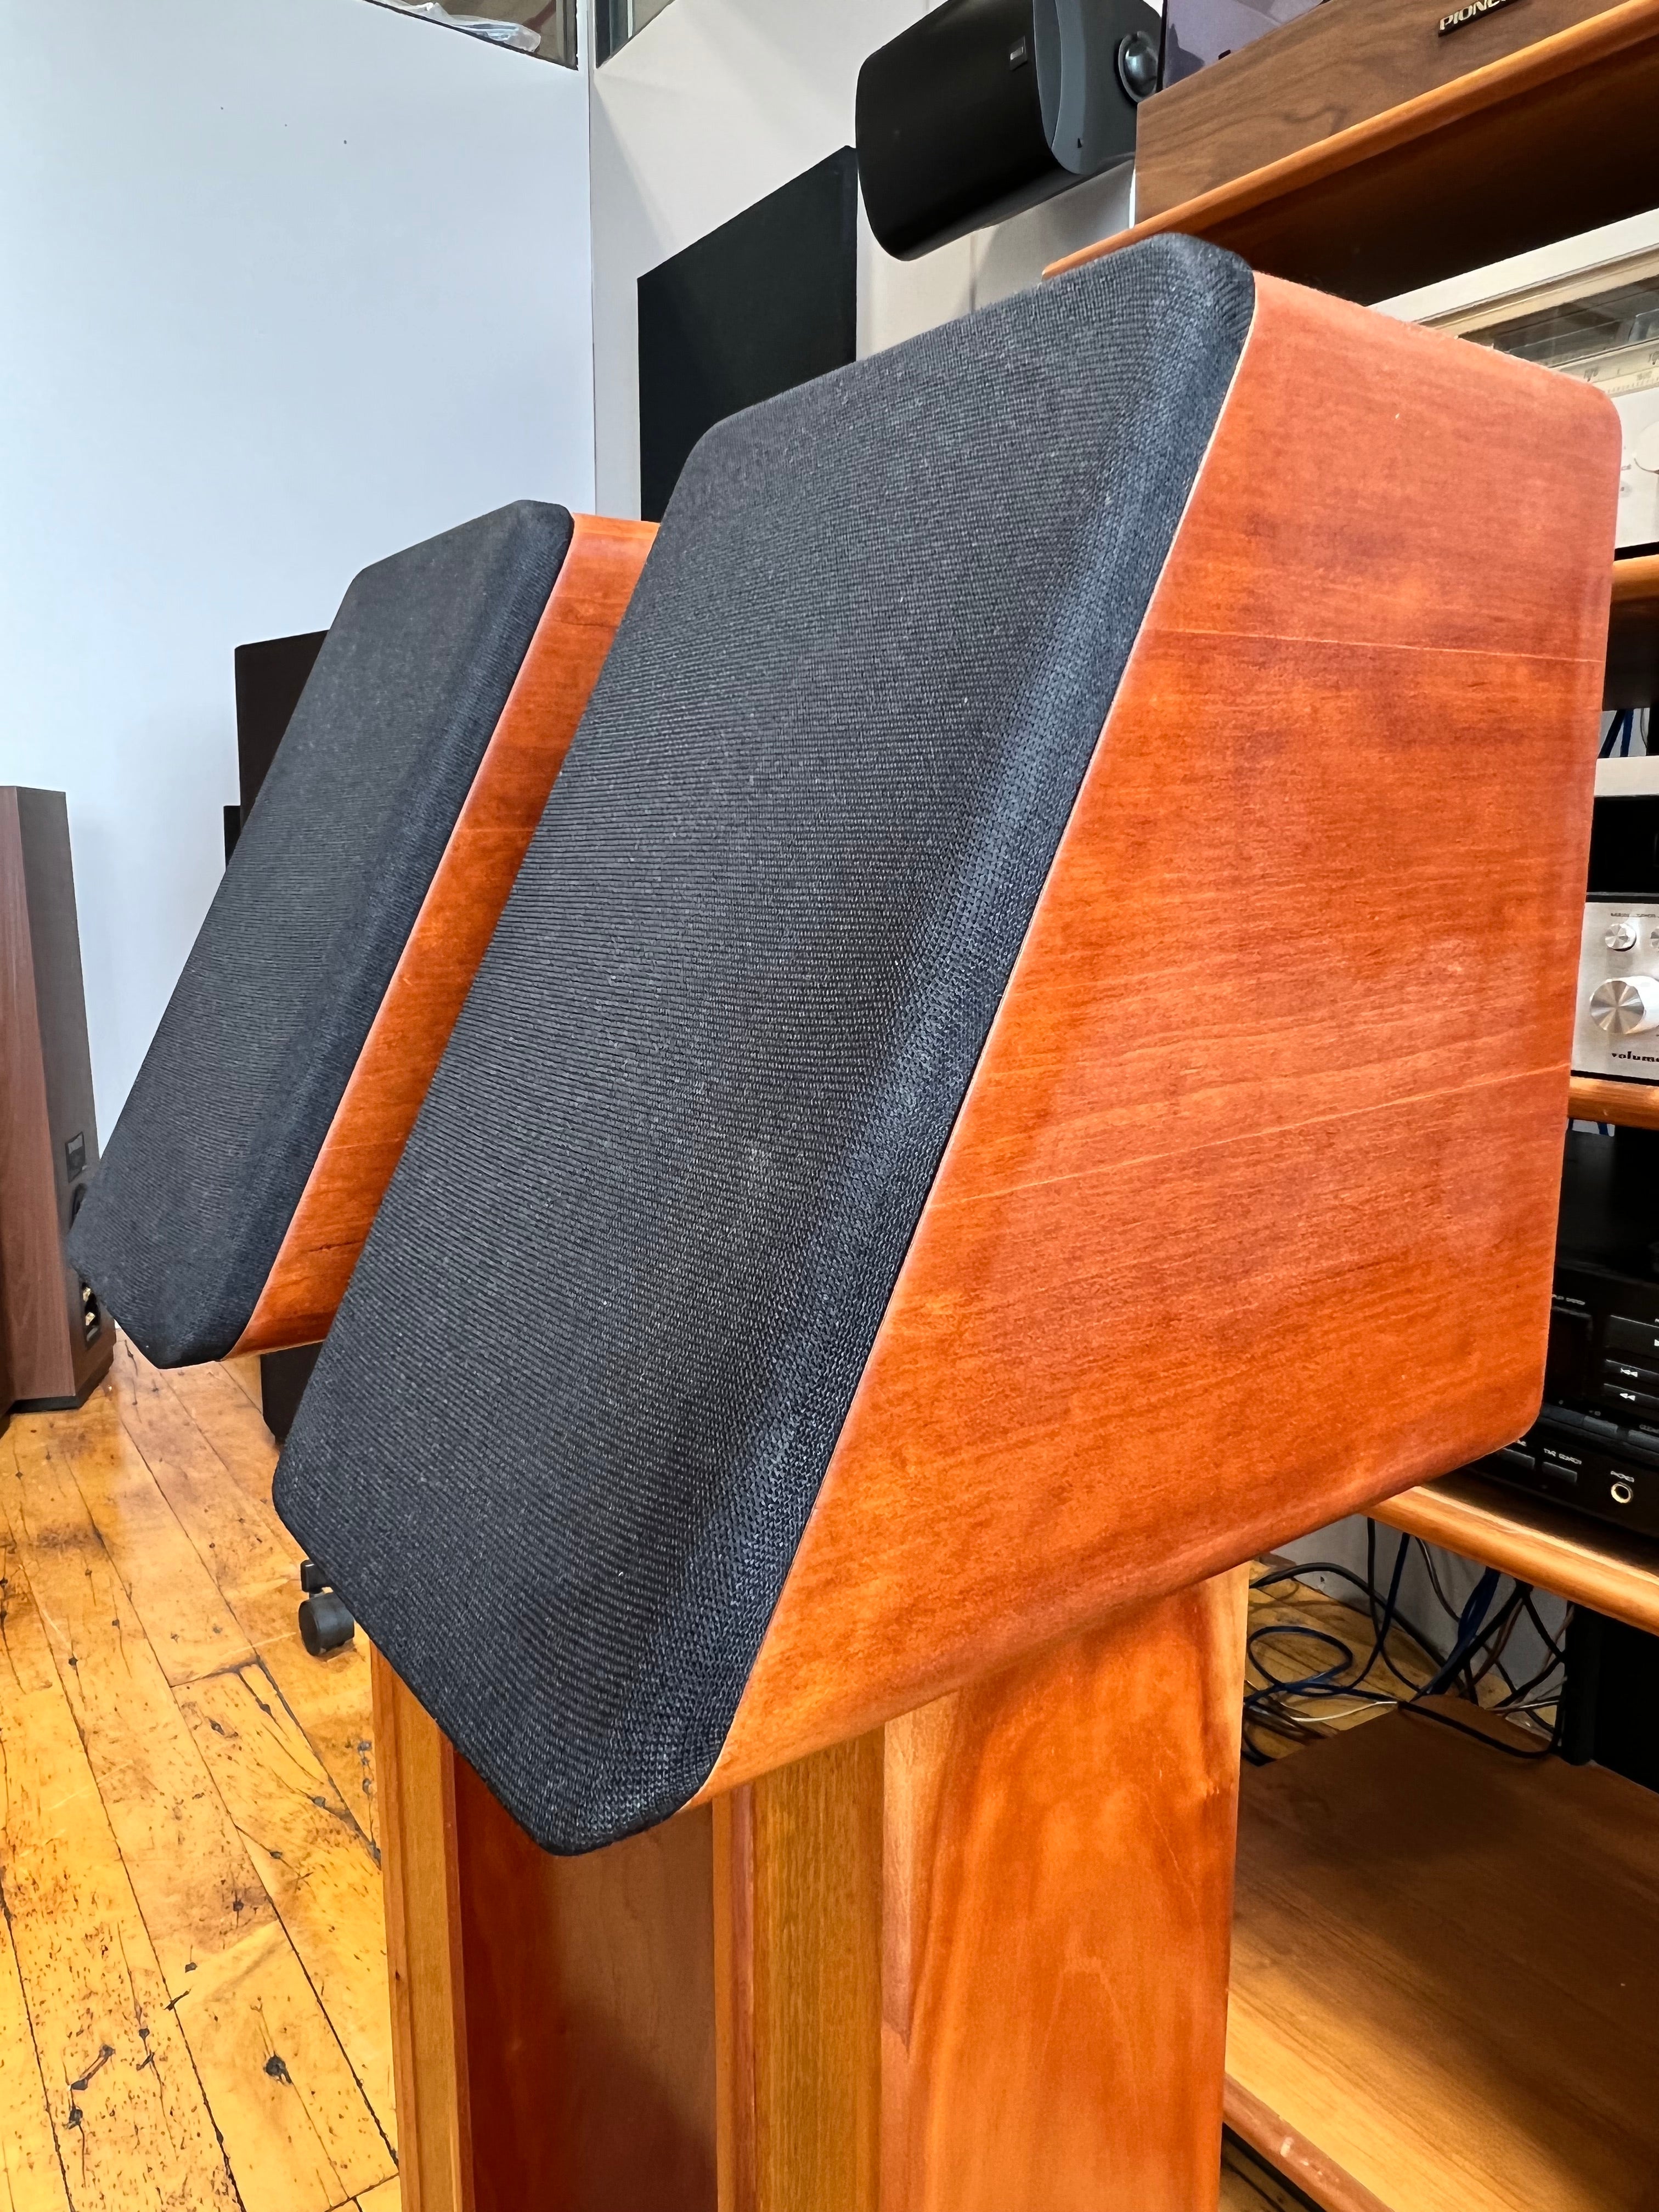 Audio Concepts, Inc. (ACI) LV Monitors with Stands - SOLD